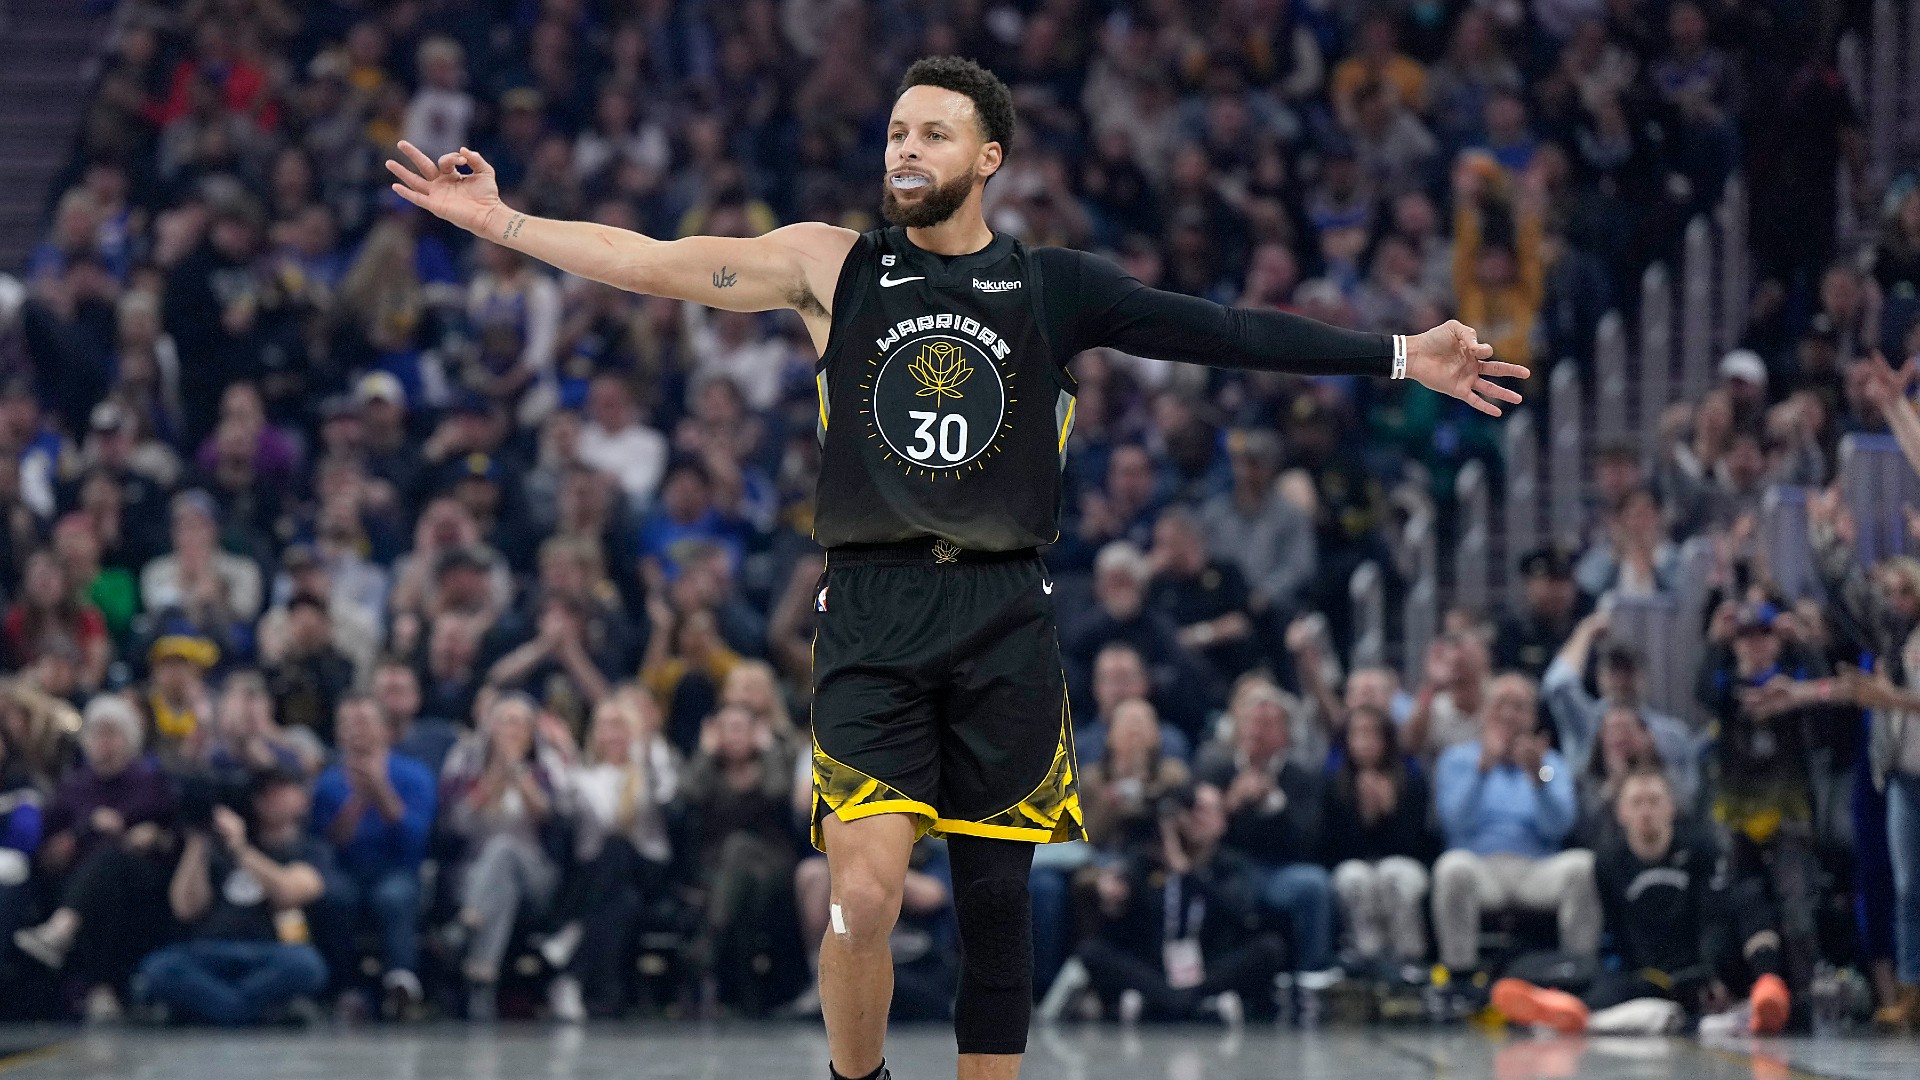 Warriors rue complacency in Curry's losing return, but Finals MVP 'felt like myself' in fourth quarter